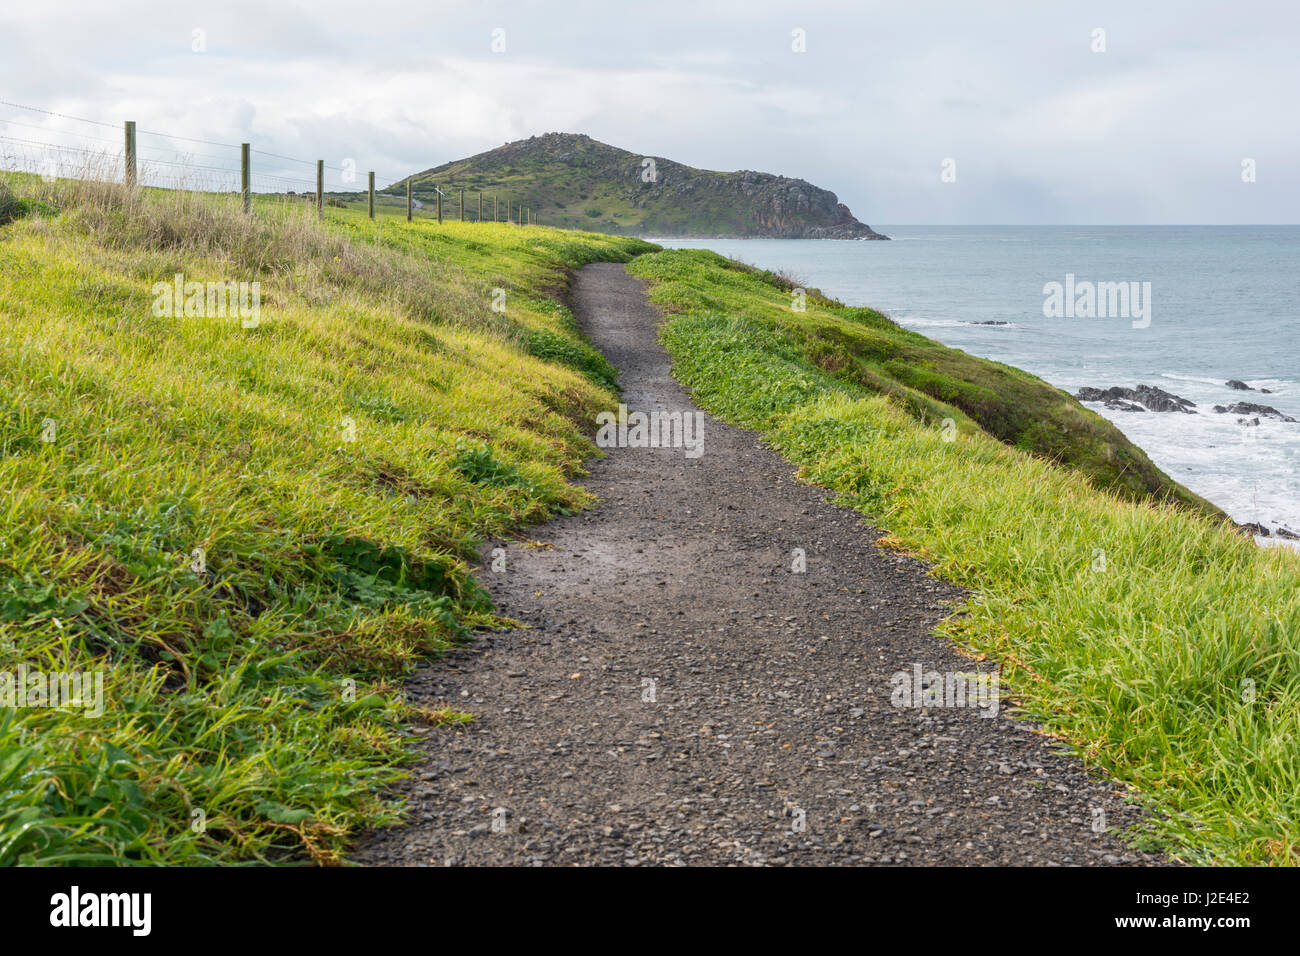 Kings Beach path following the coast toThe Bluff seen in the distance at Victor Harbor, South Australia. Part of the Fleurieu Peninsula. Stock Photo